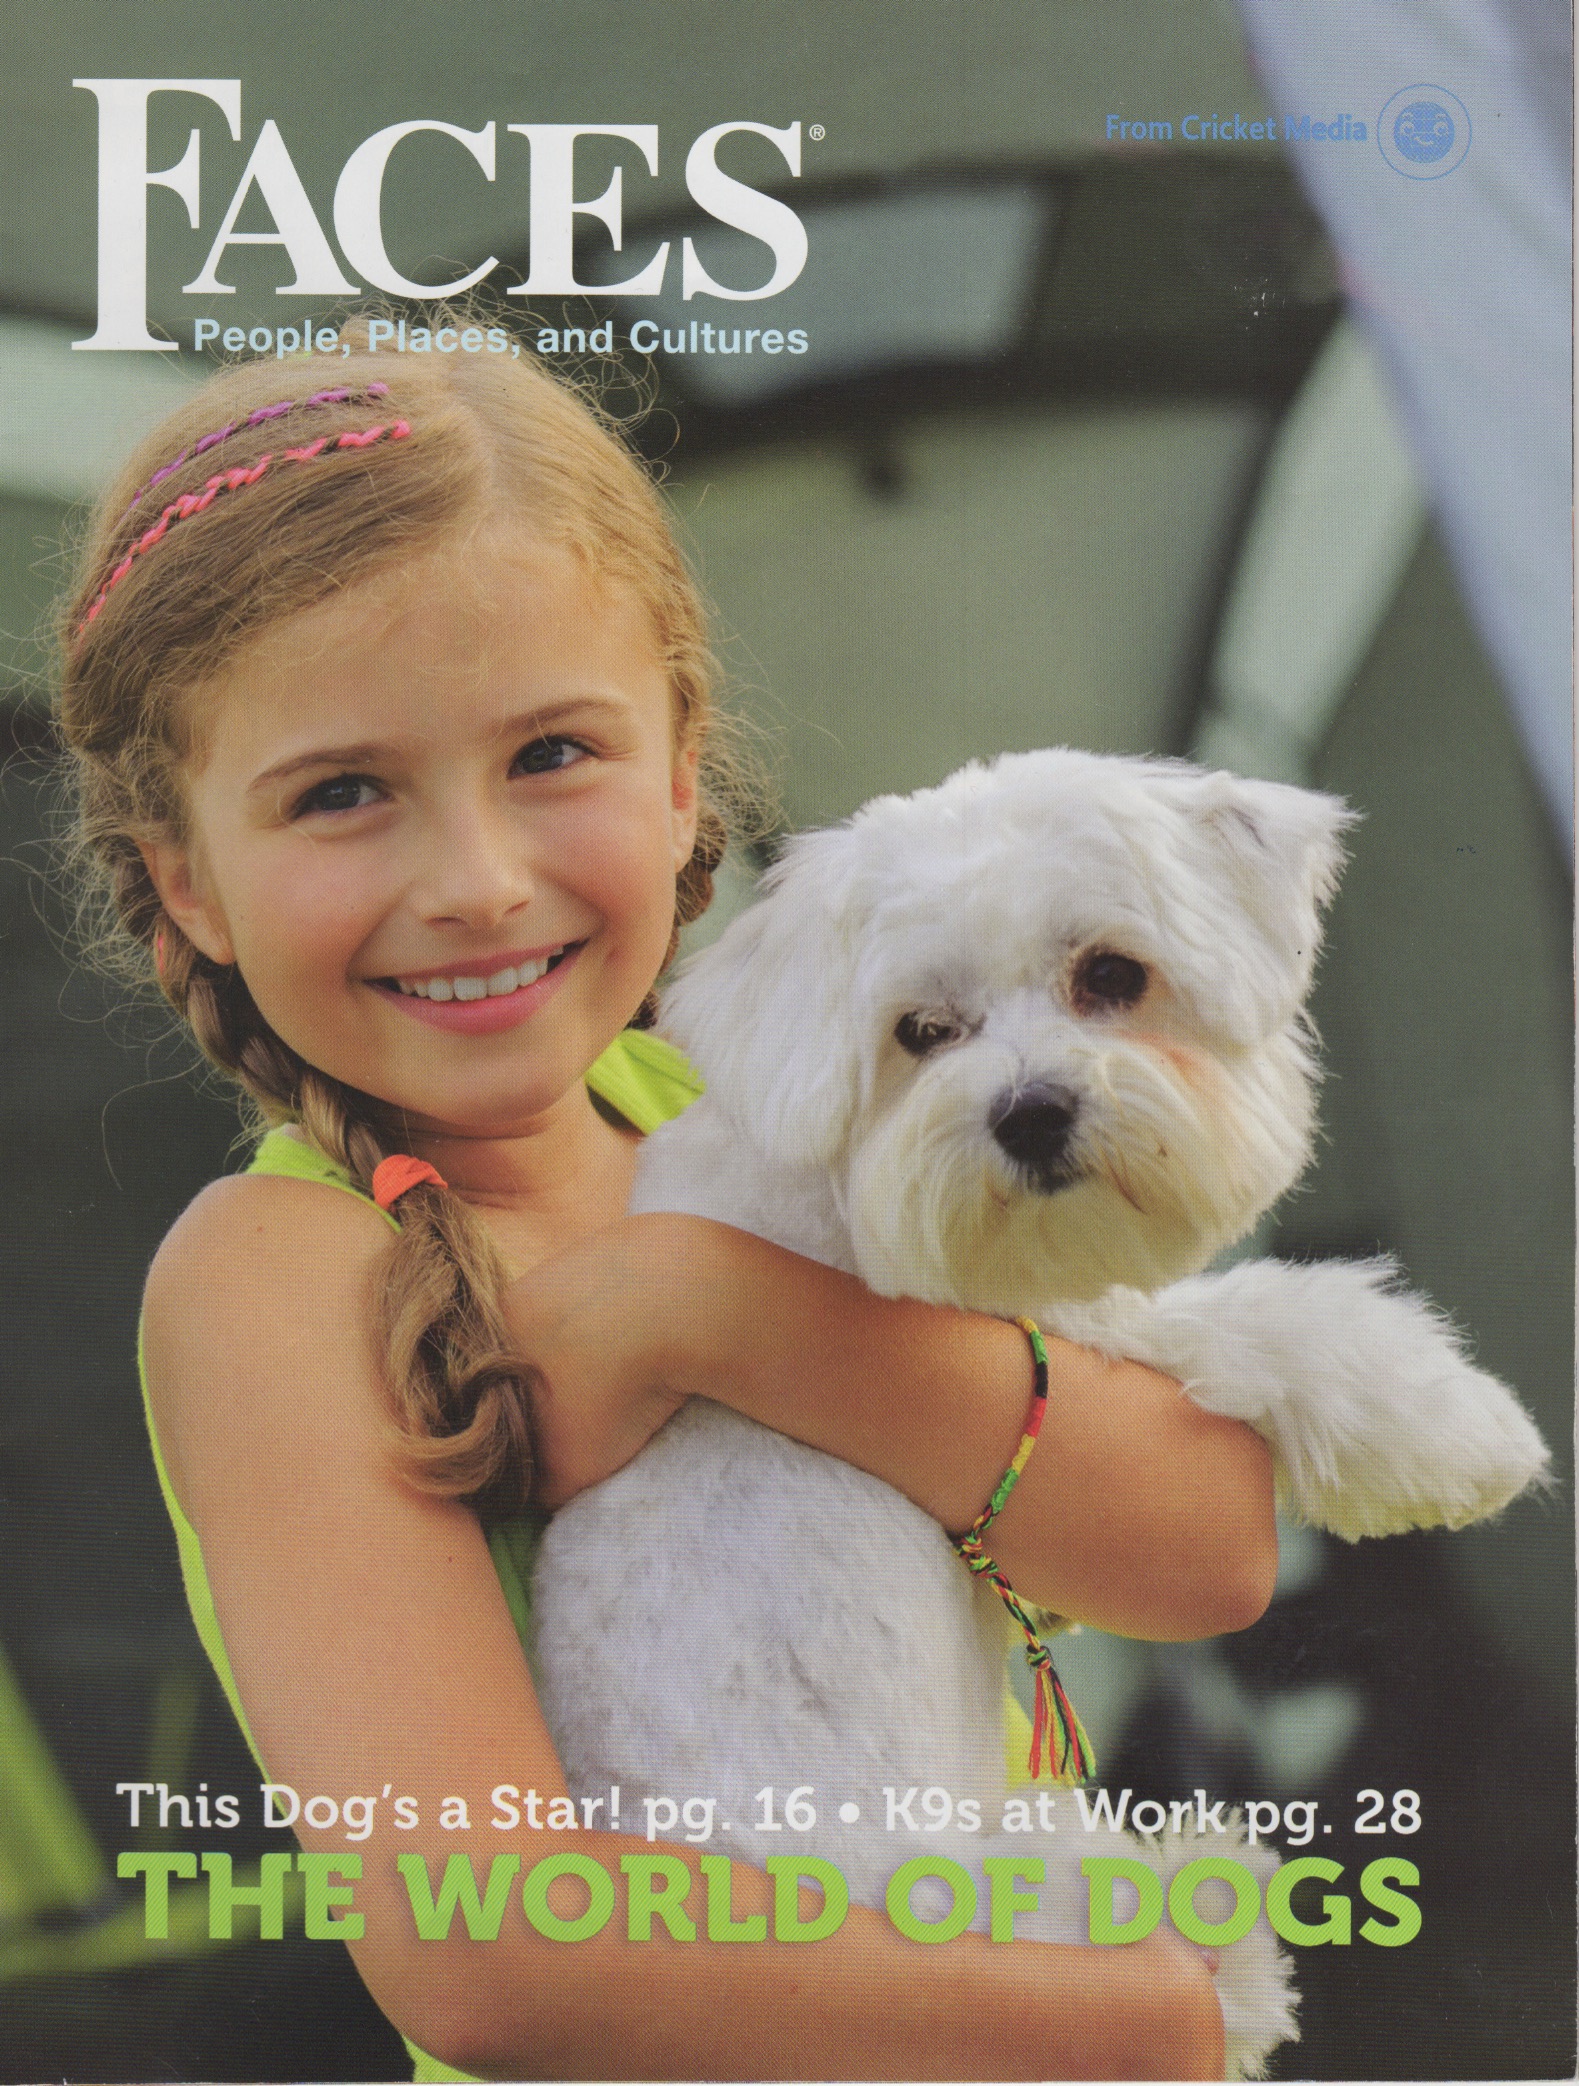 The World Of Dogs, October 2016, FACES Magazine